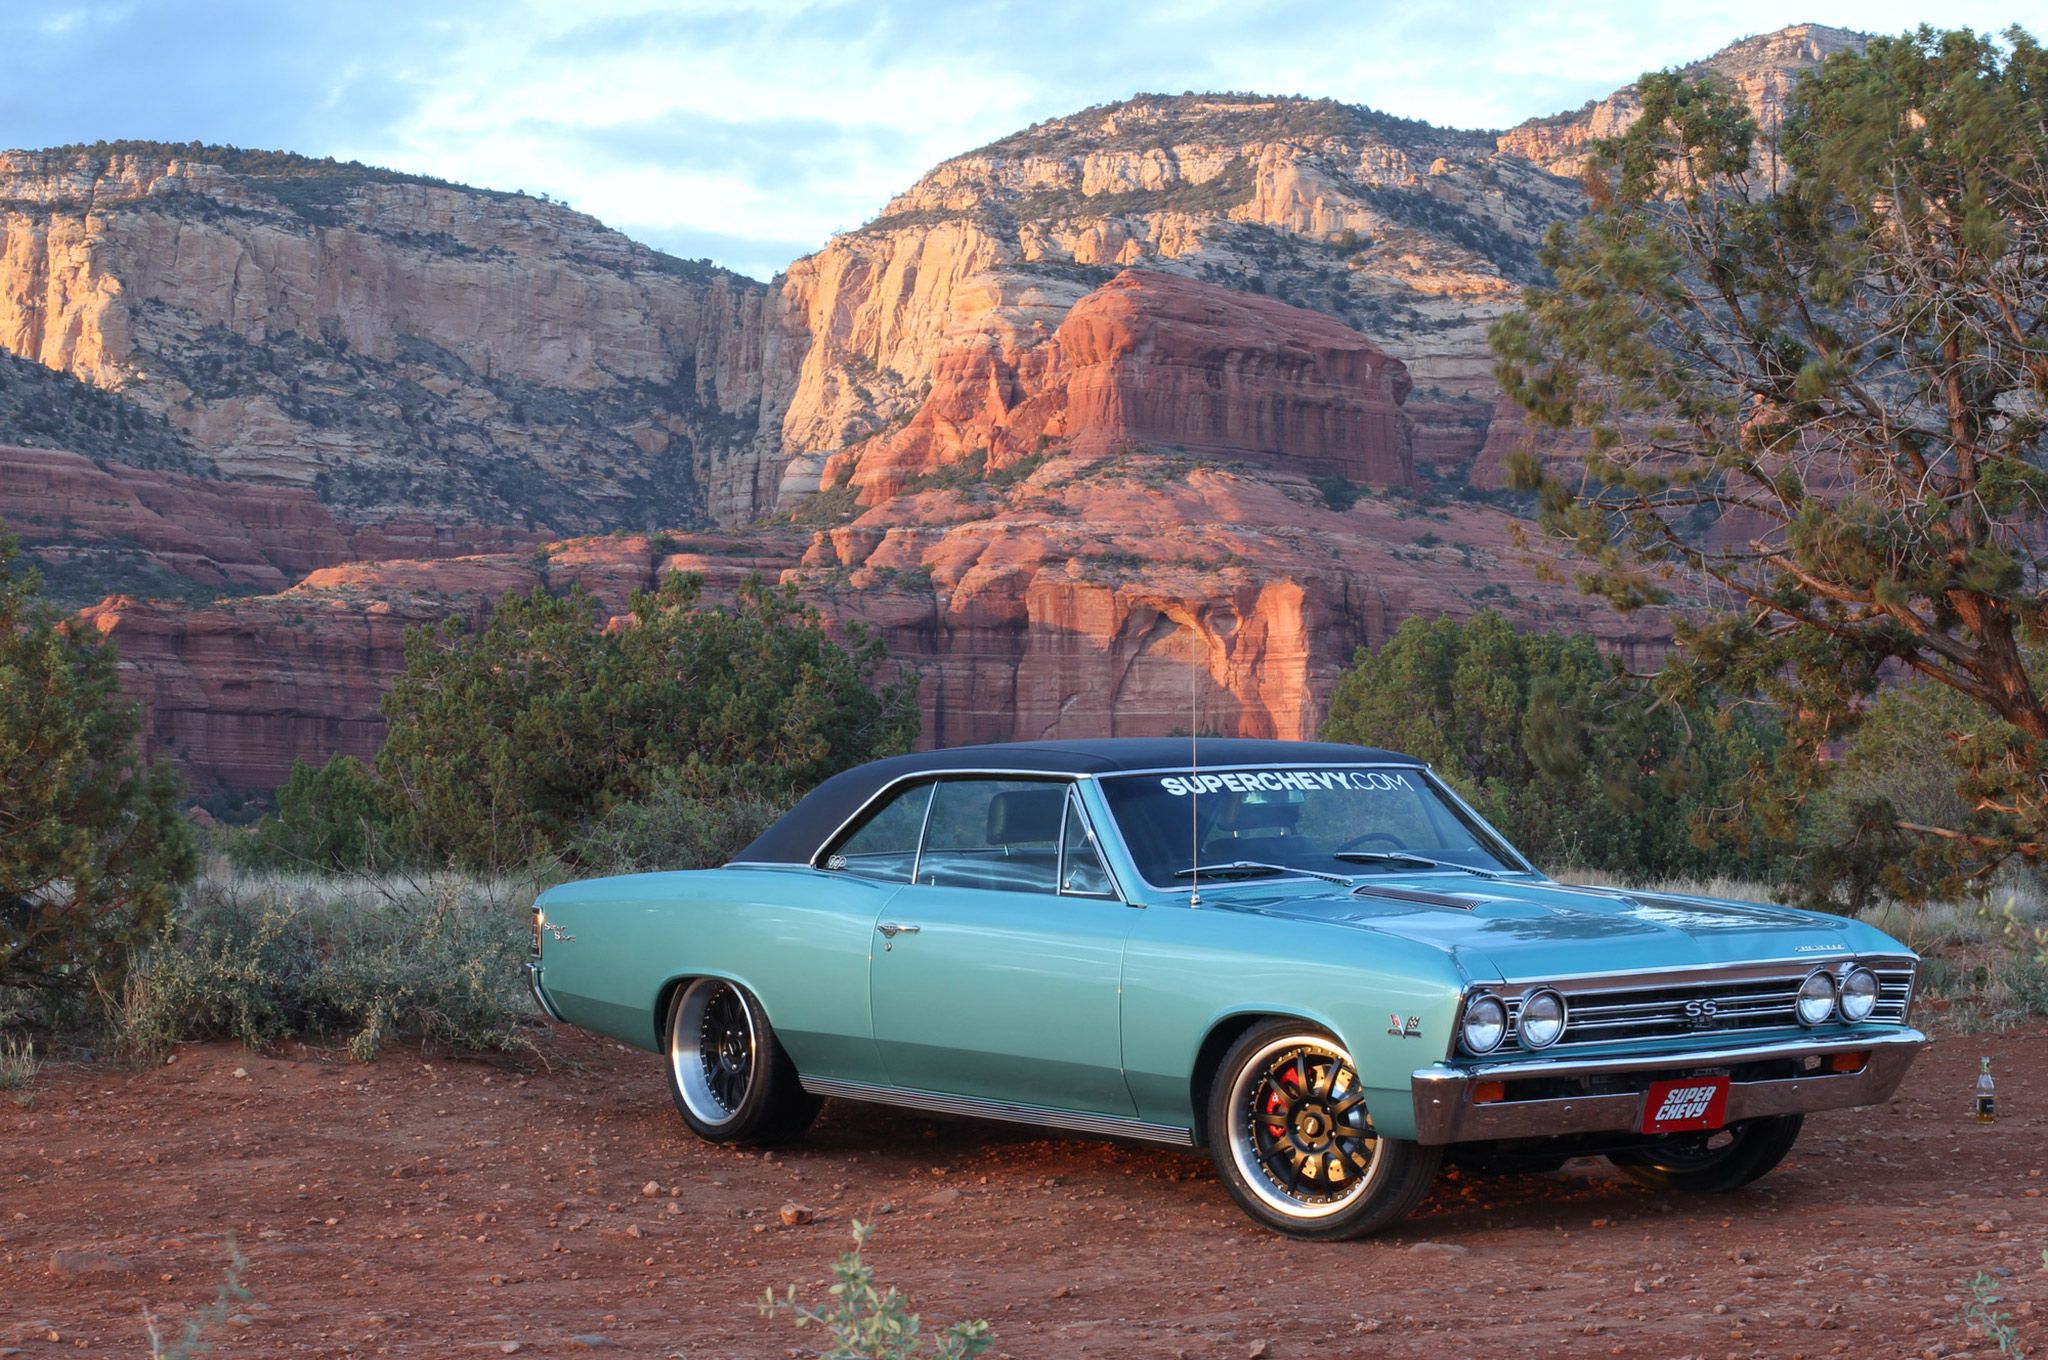 003-1967-chevelle-week-to-wicked-427-engine-install-2 